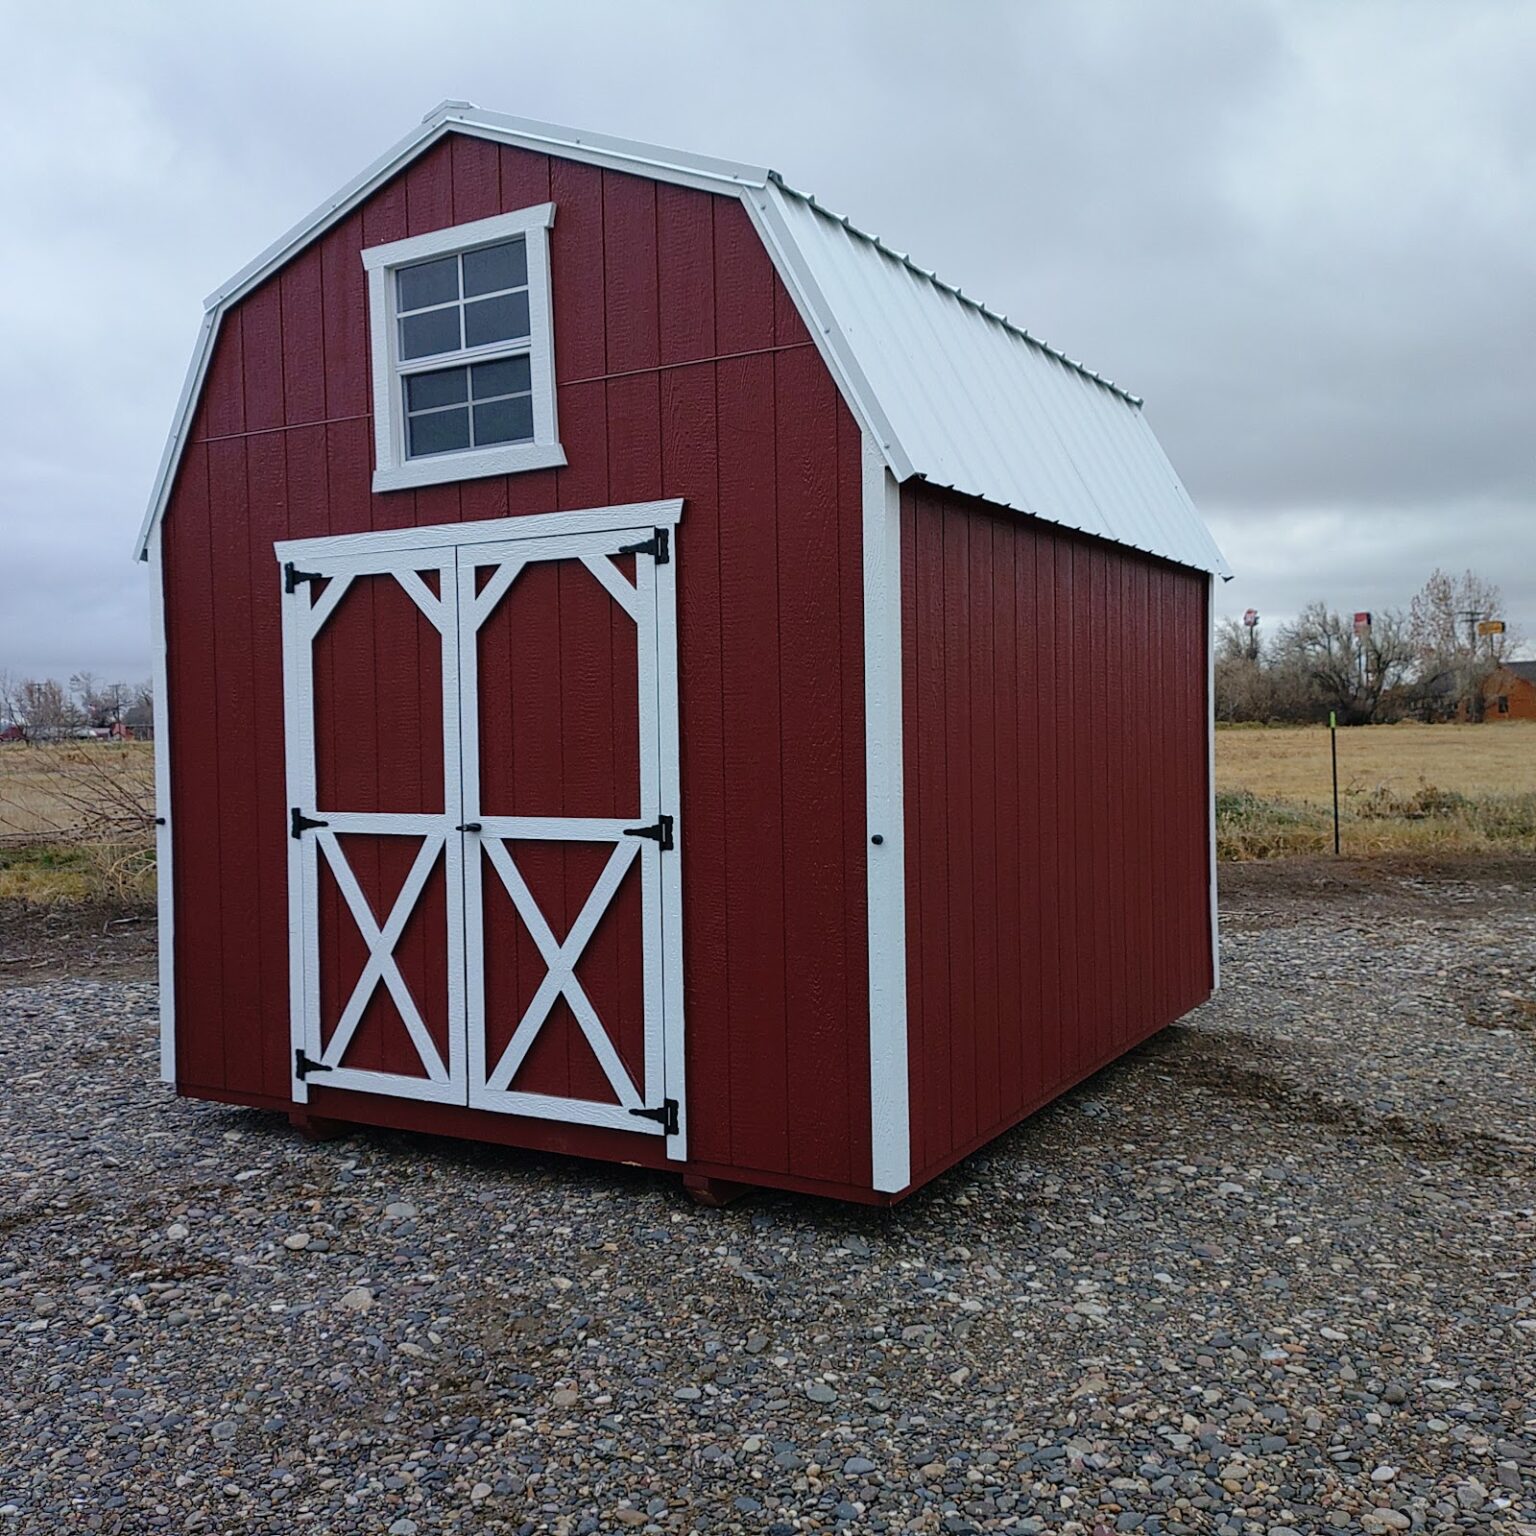 A charming red and white 10x12 barn with a window in the gable and double barn doors beneath the window.